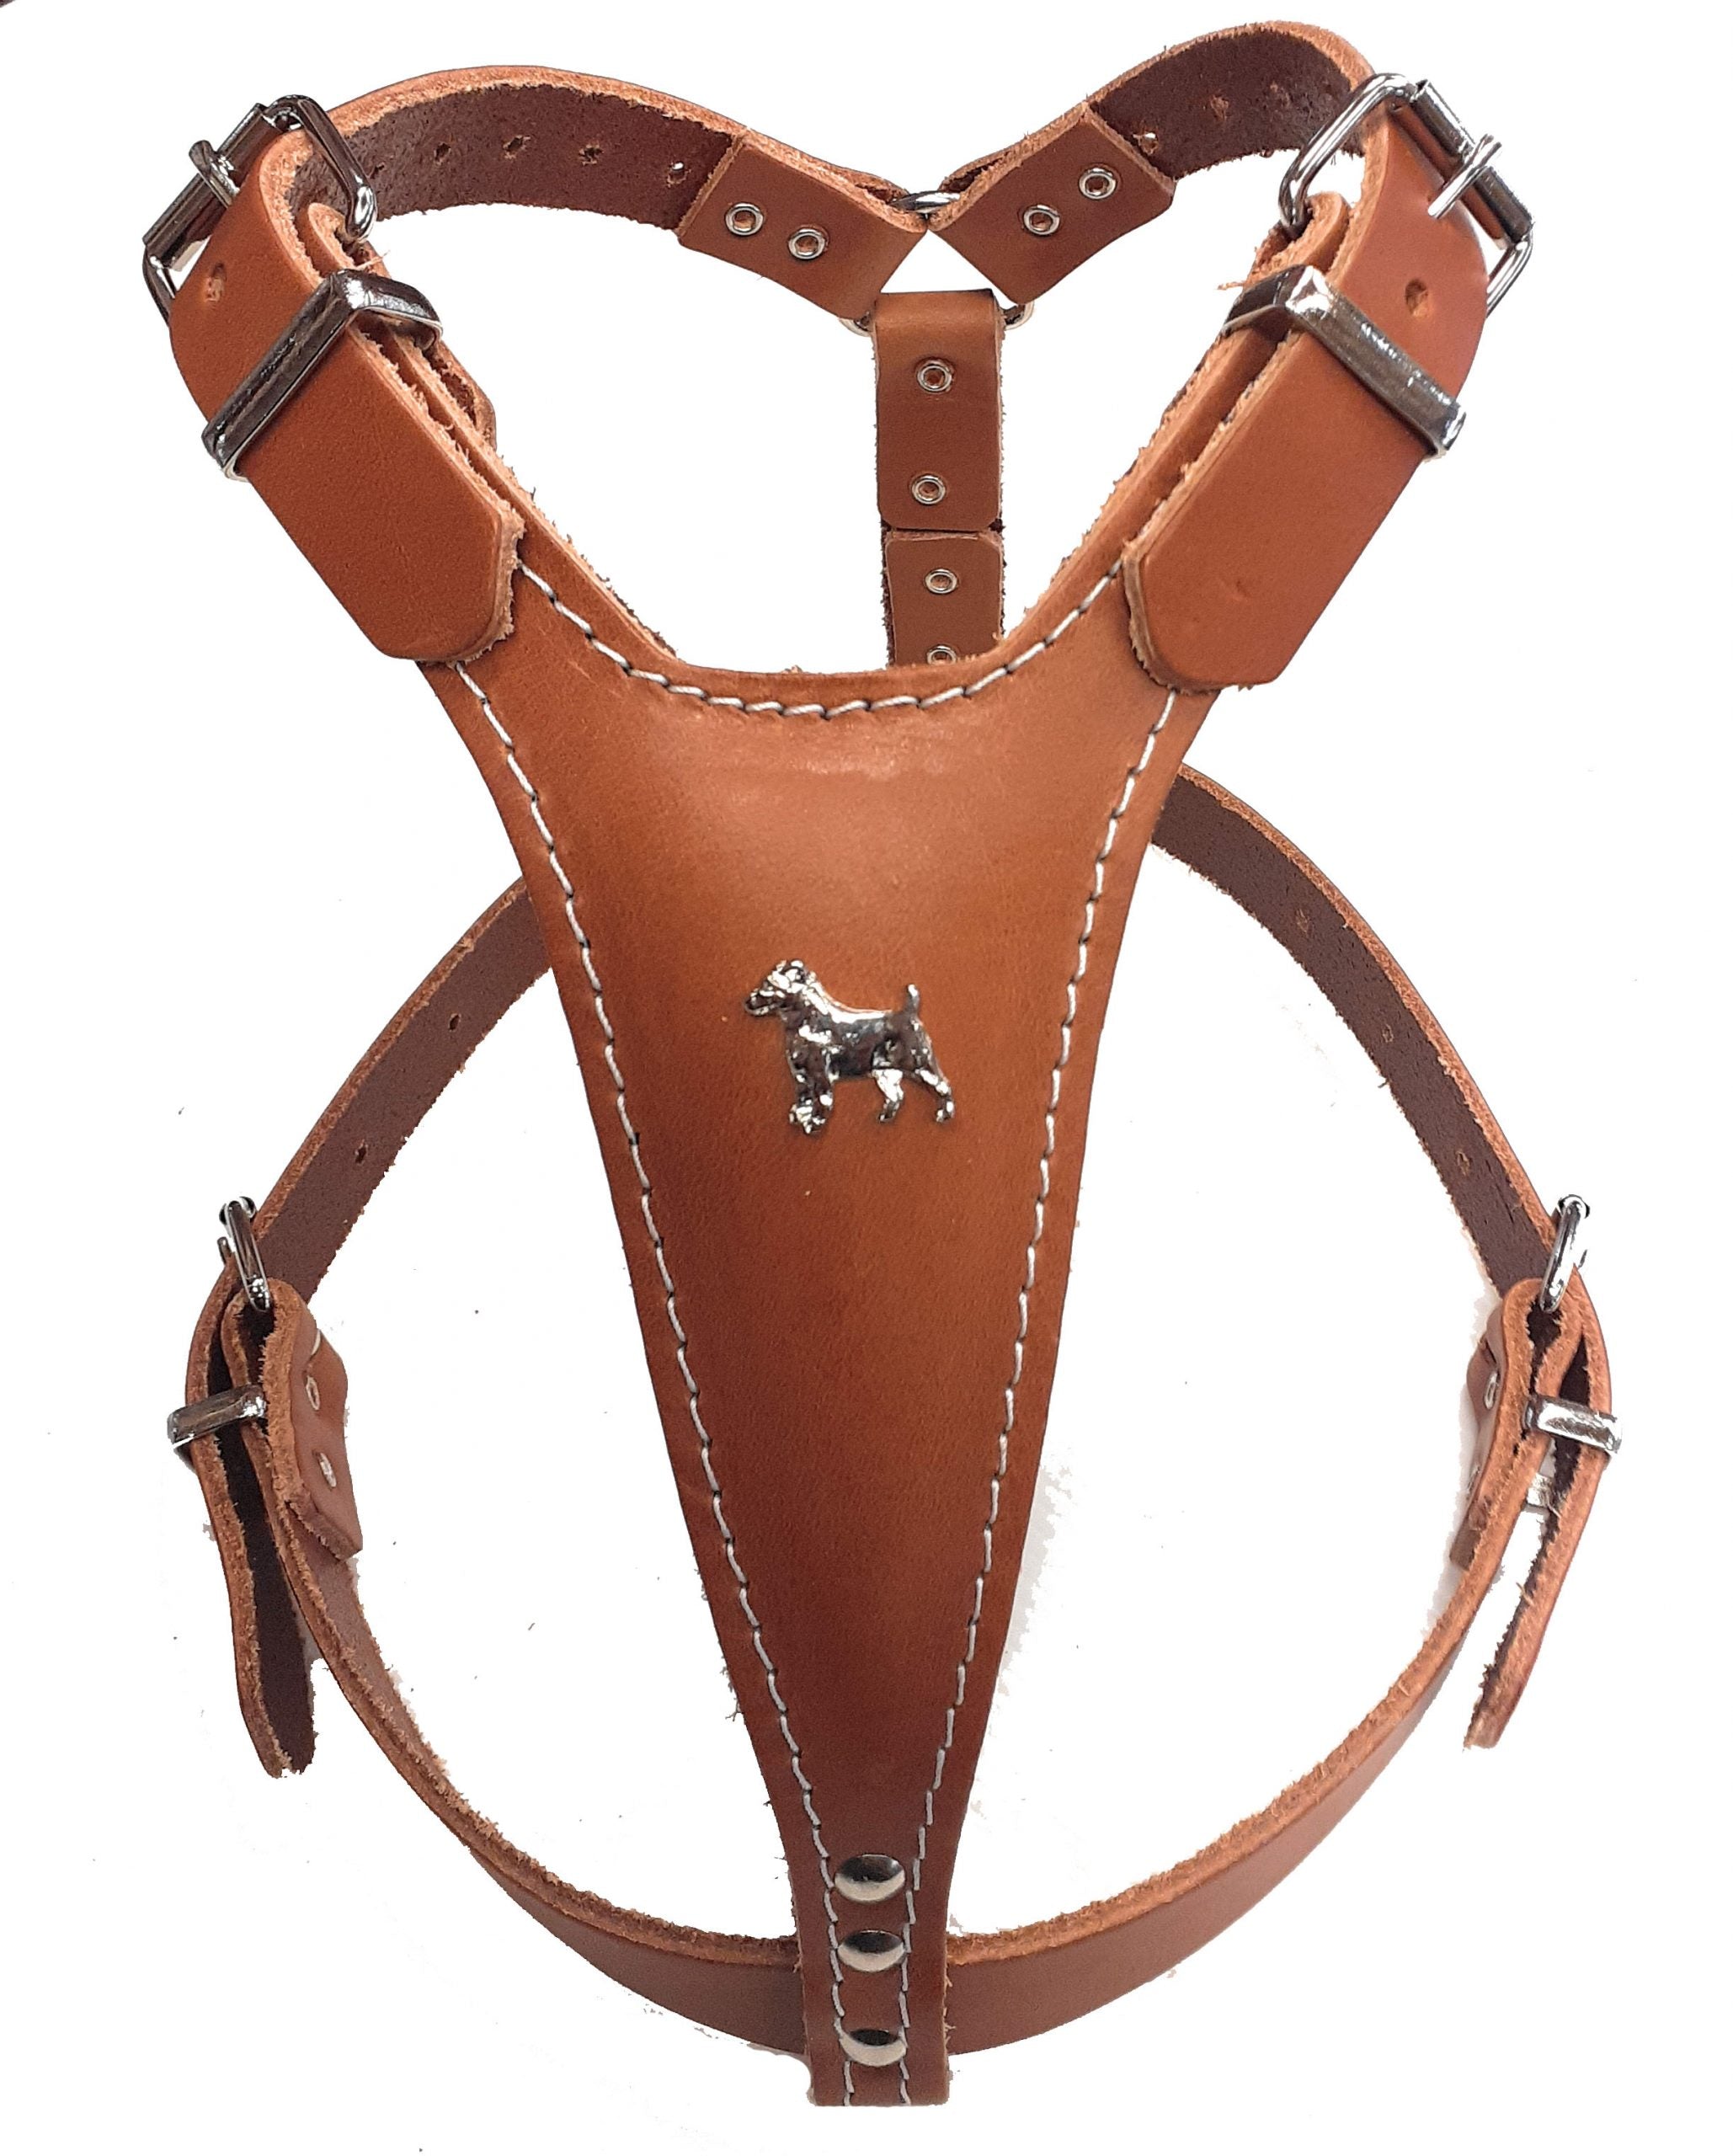 Tan Leather Dog Harness with Staffordshire Bullterrier Motif and Knot